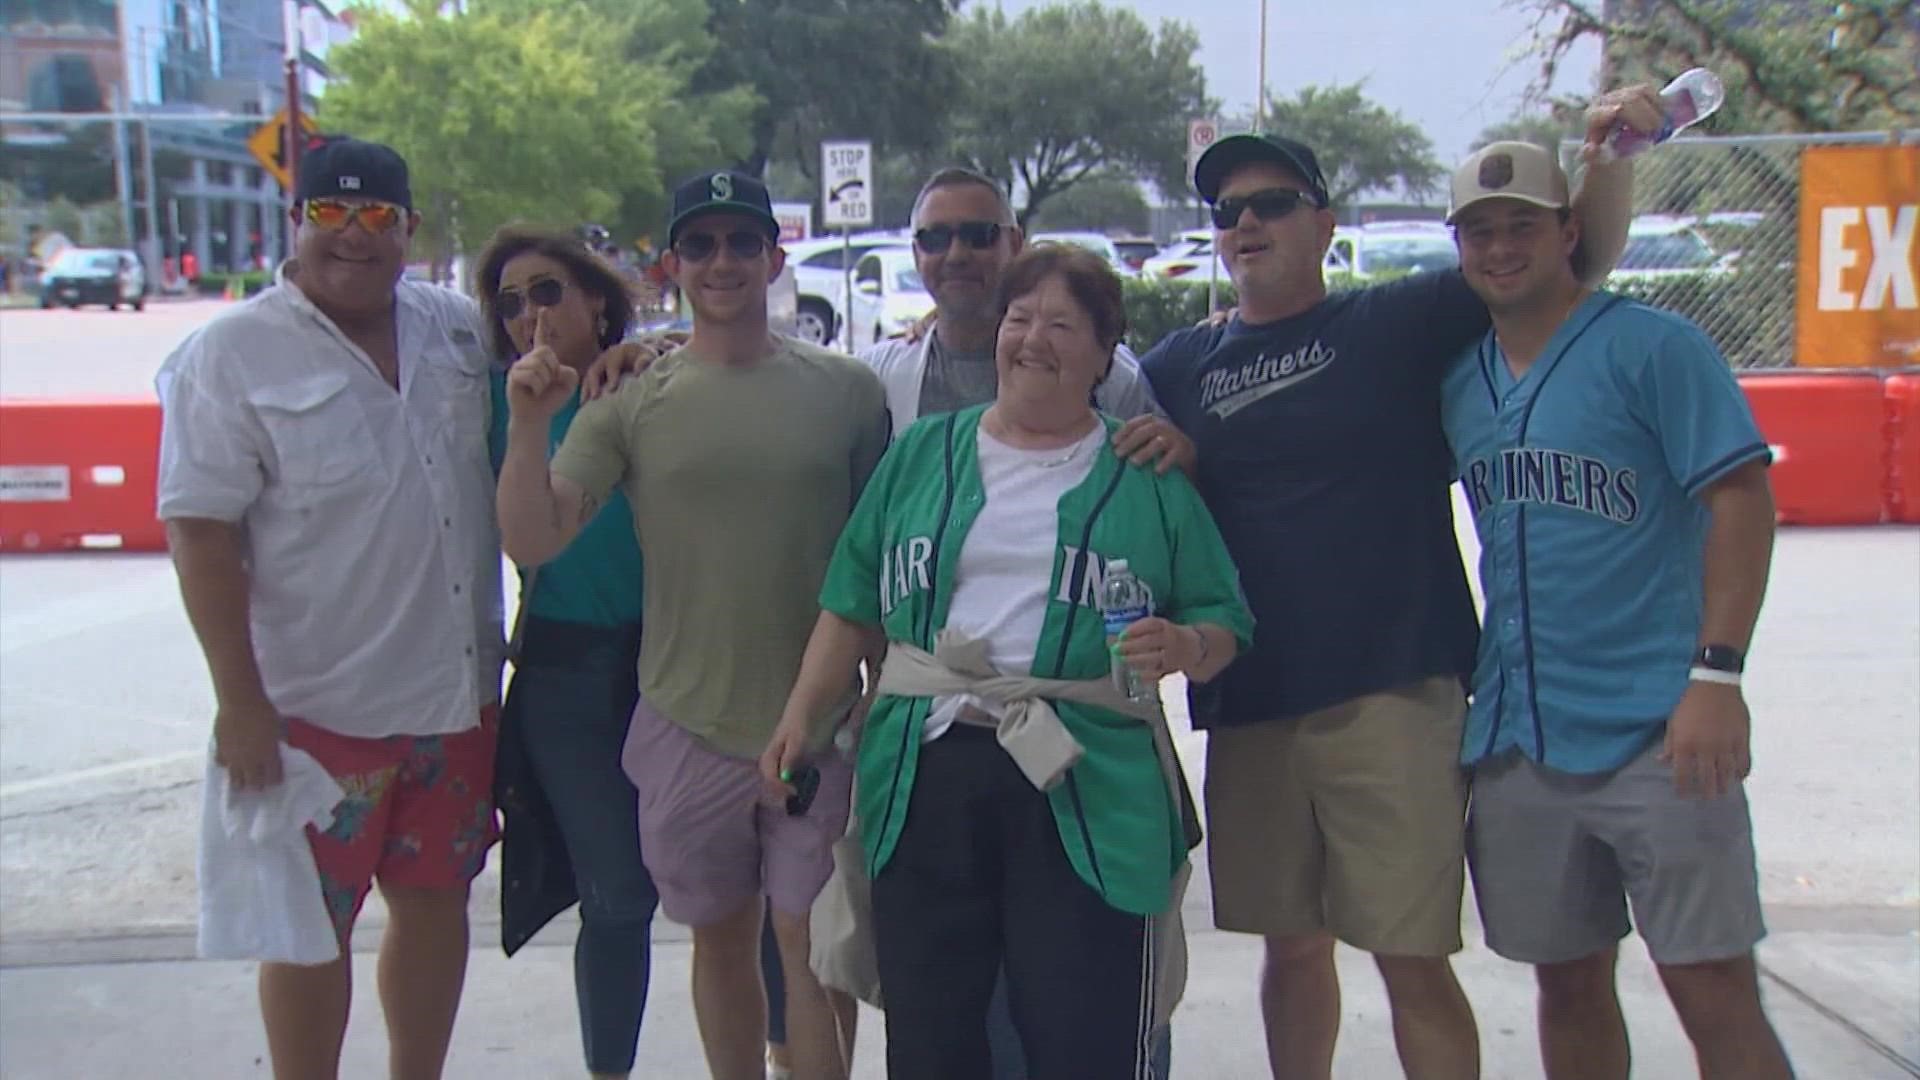 Cal Raleigh's family rallies in Houston for Mariners vs. Astros Game 2